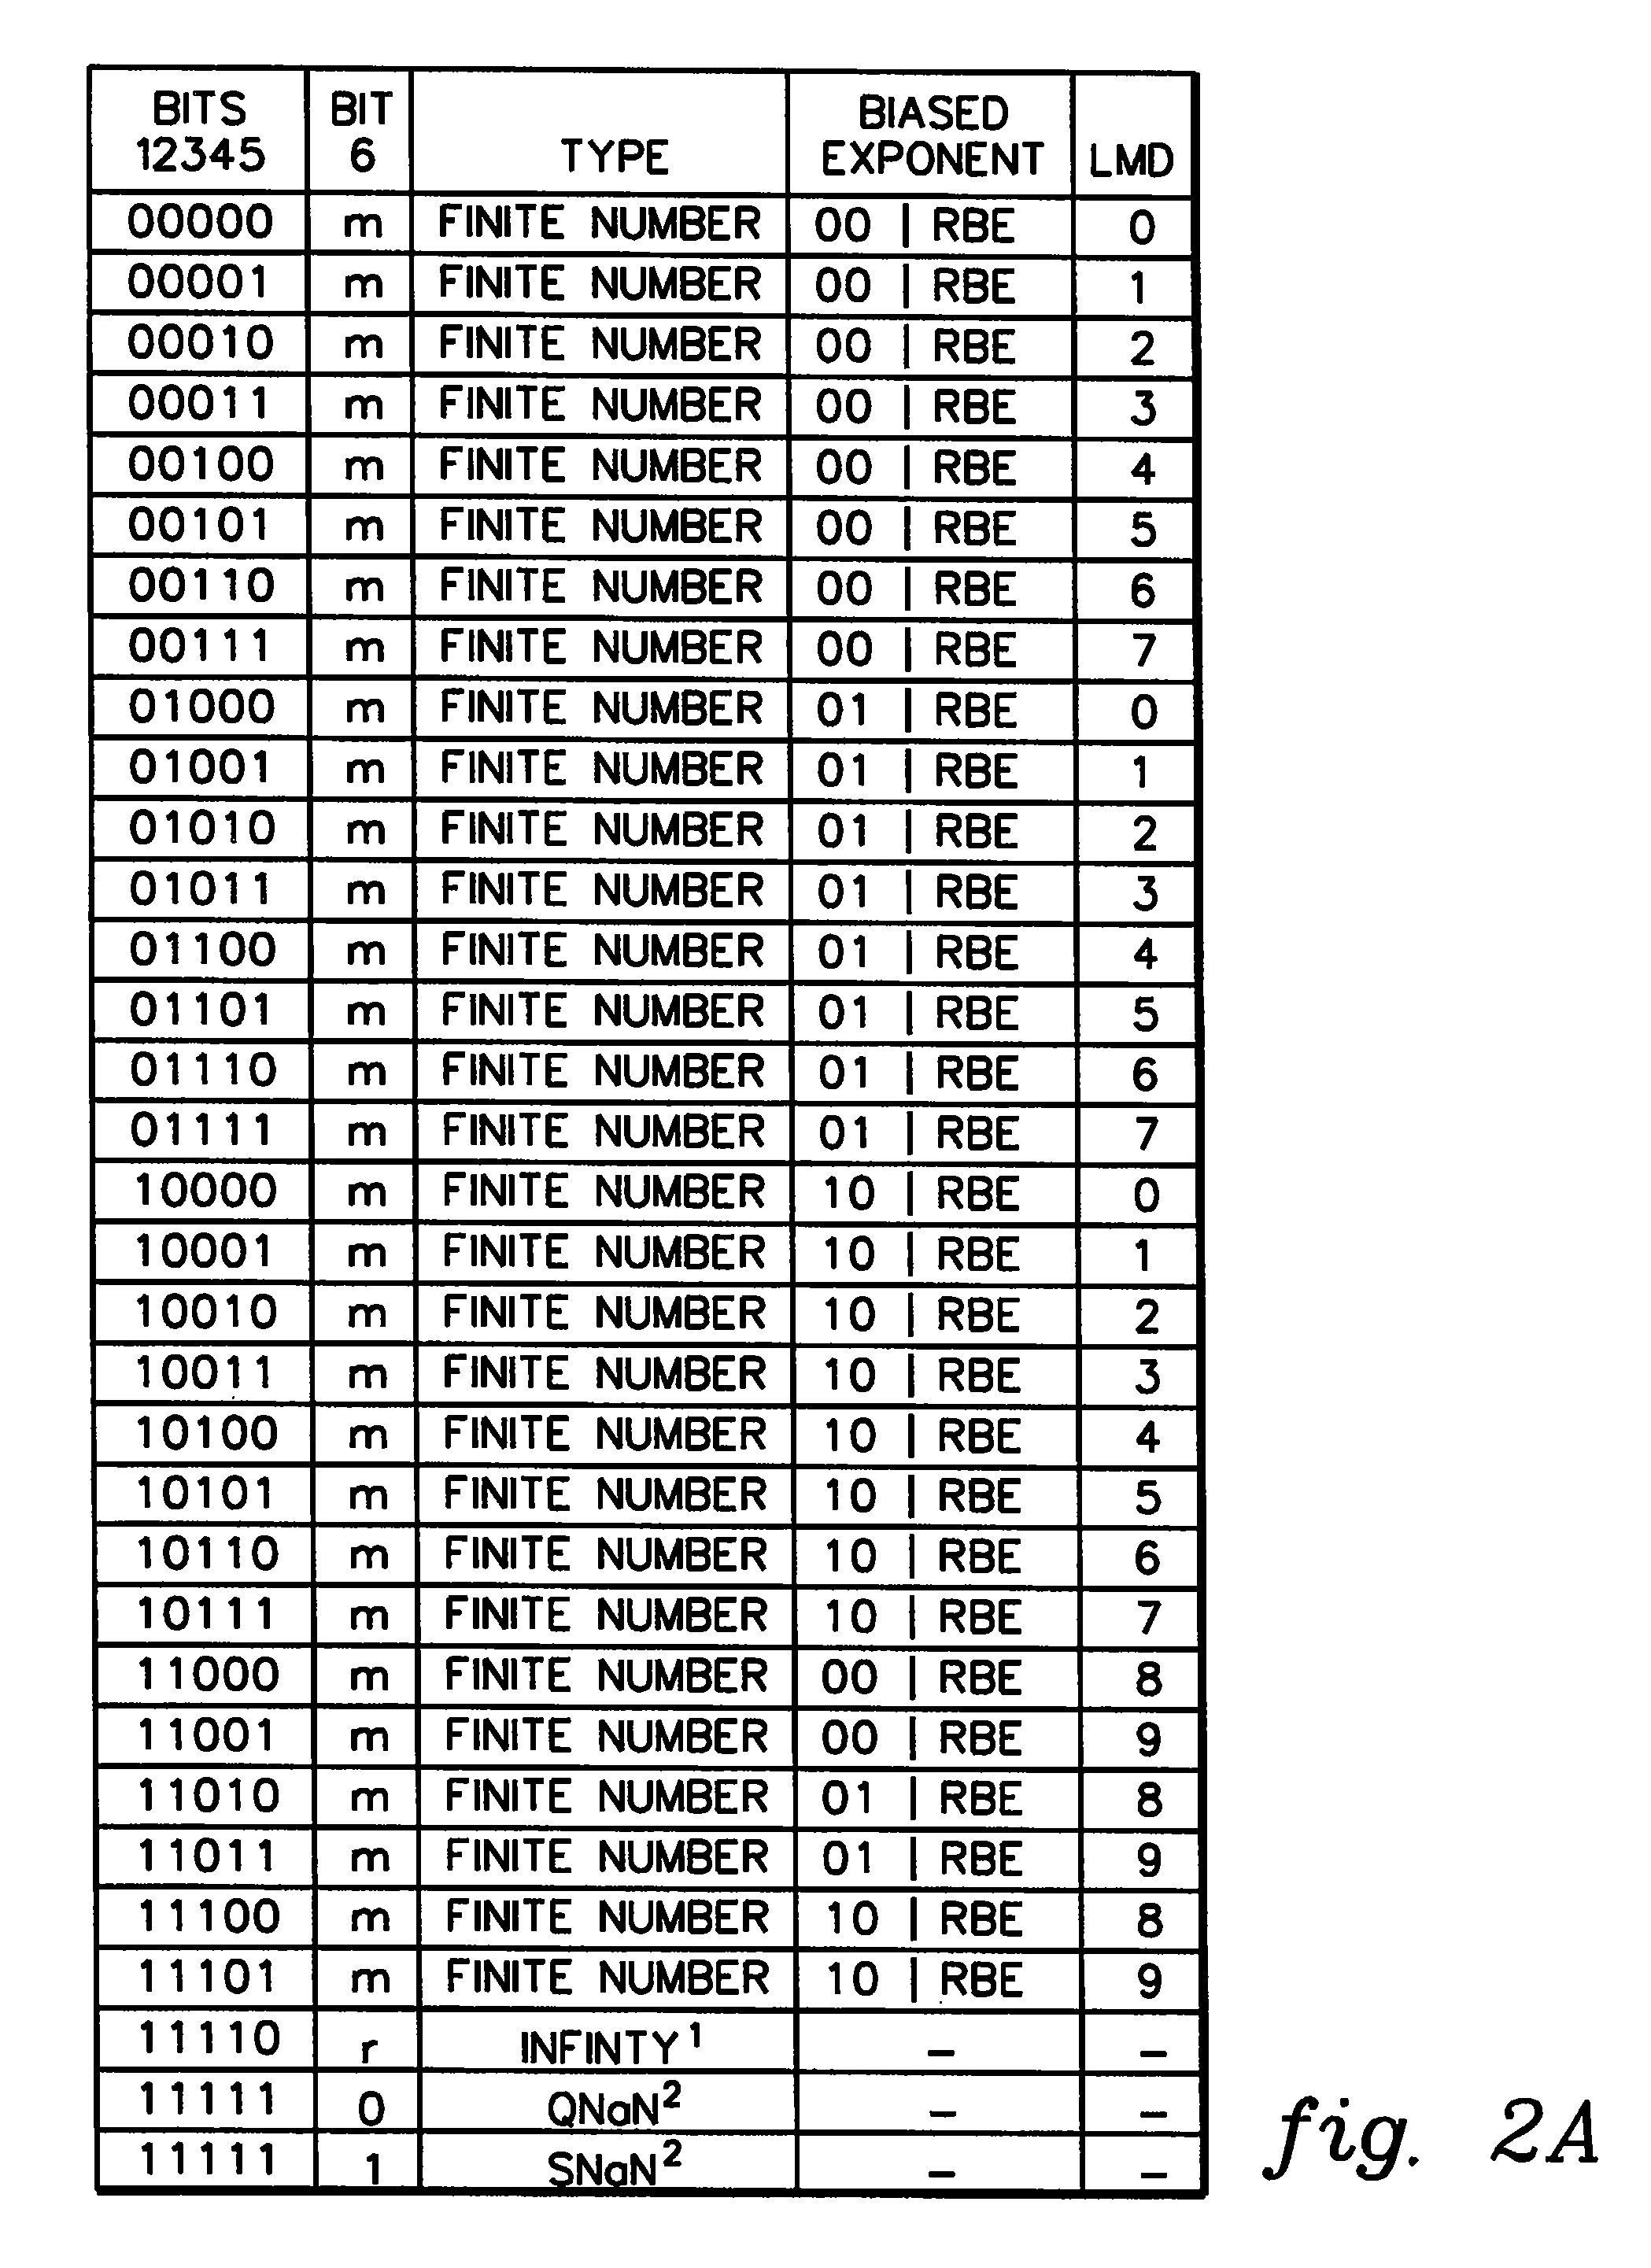 Composition of decimal floating point data